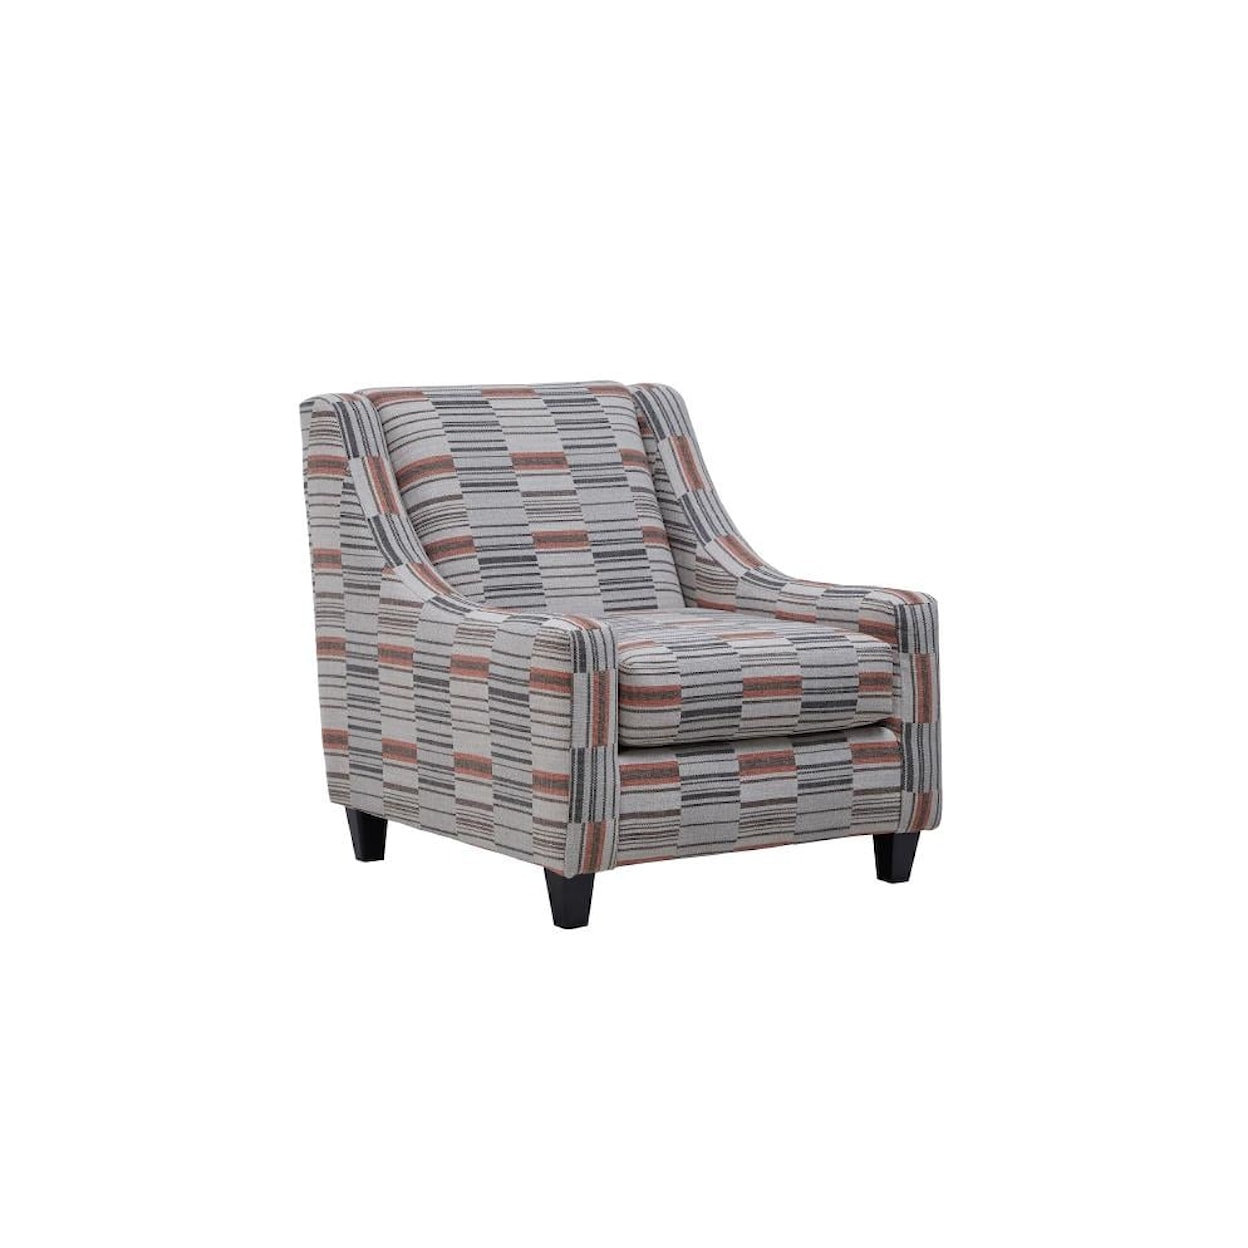 Fusion Furniture 3005 STANLEY SANDSTONE Accent Chair with Exposed Wooden Legs